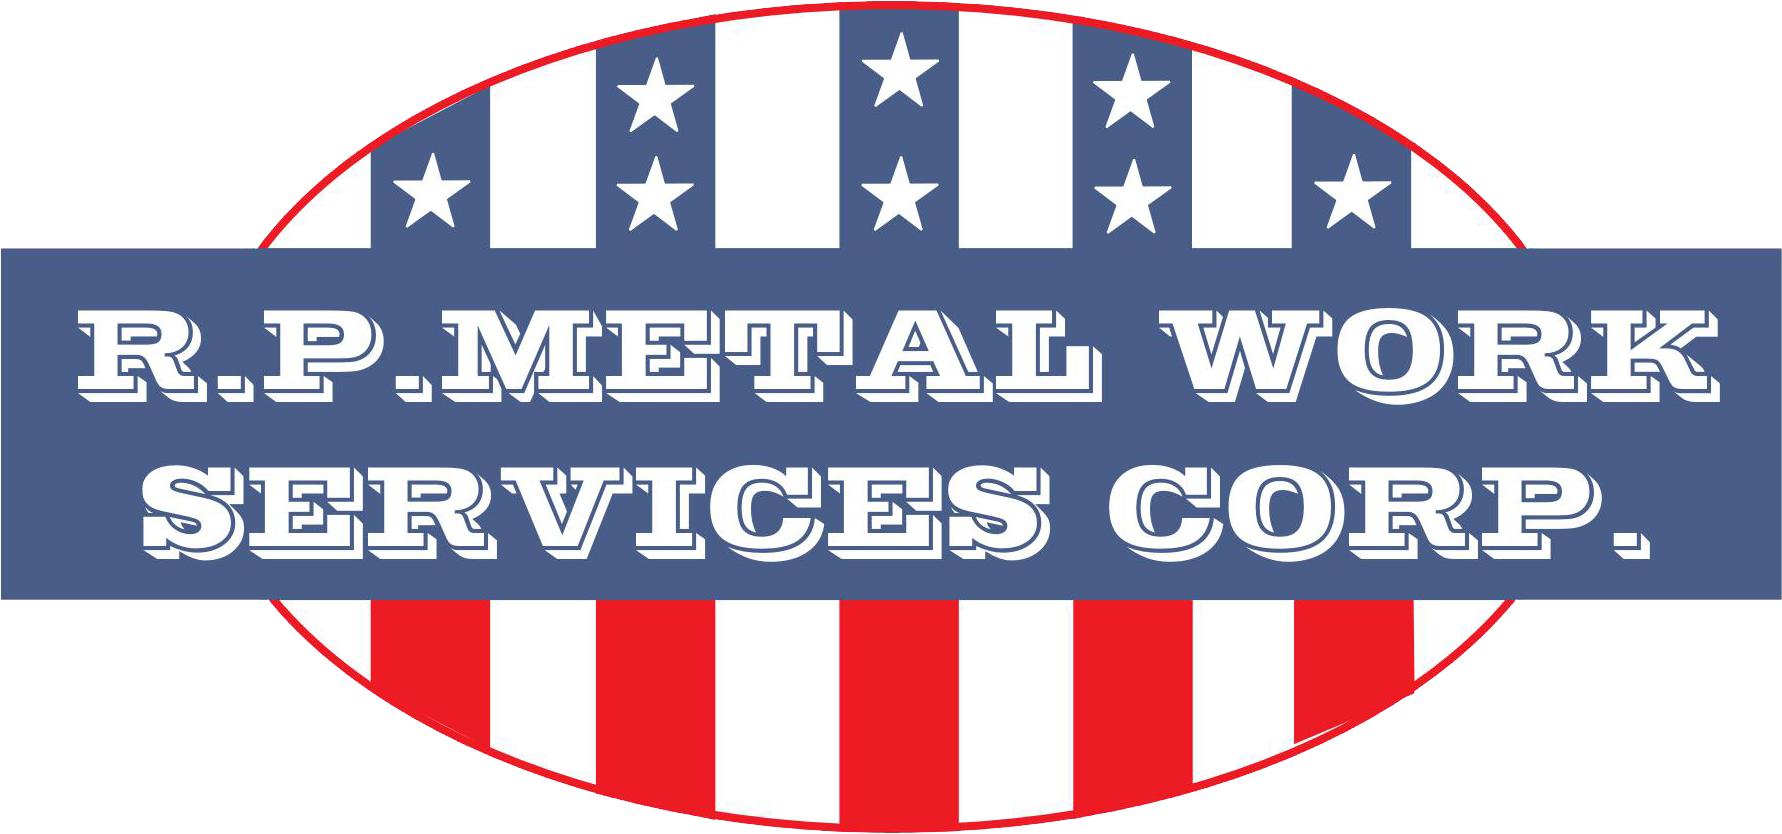 R.P. METAL WORK SERVICES CORP's Logo